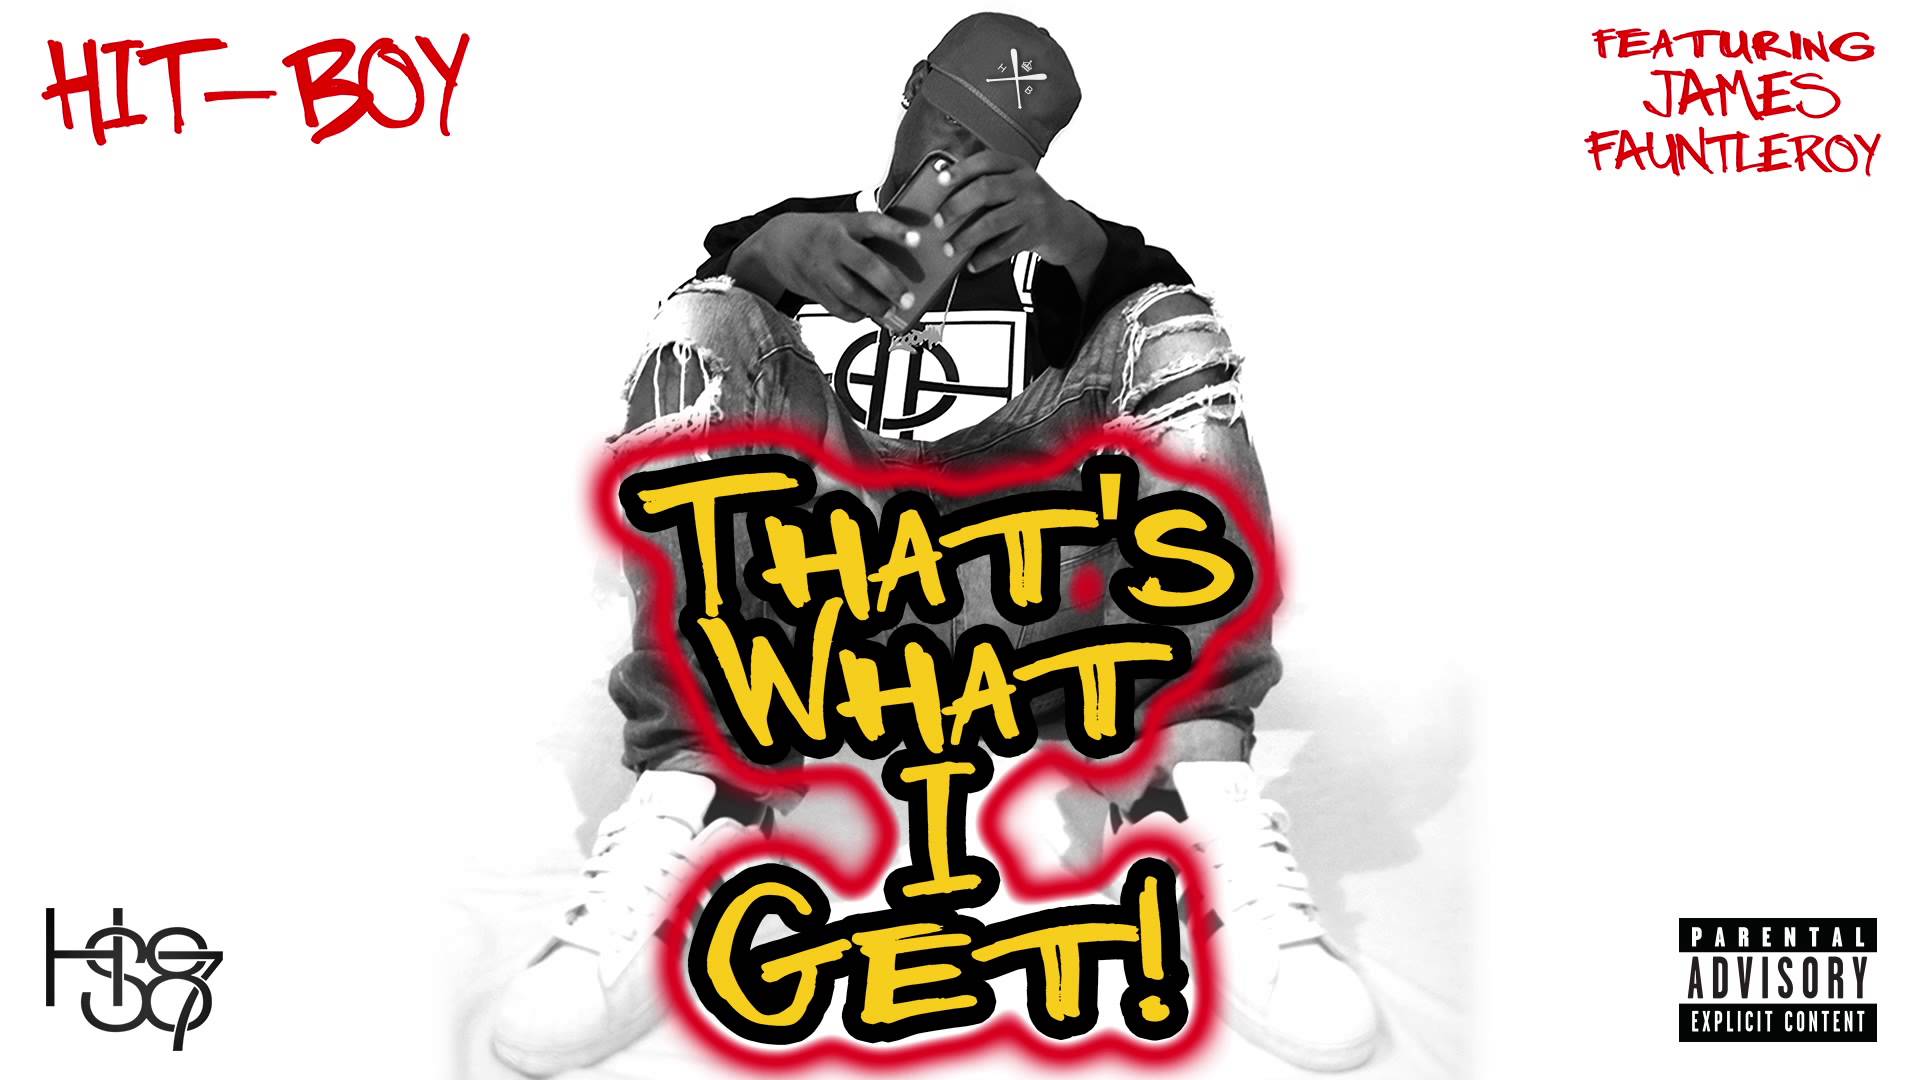 Hit-Boy ft. James Fauntleroy – “That’s What I Get” (Audio)